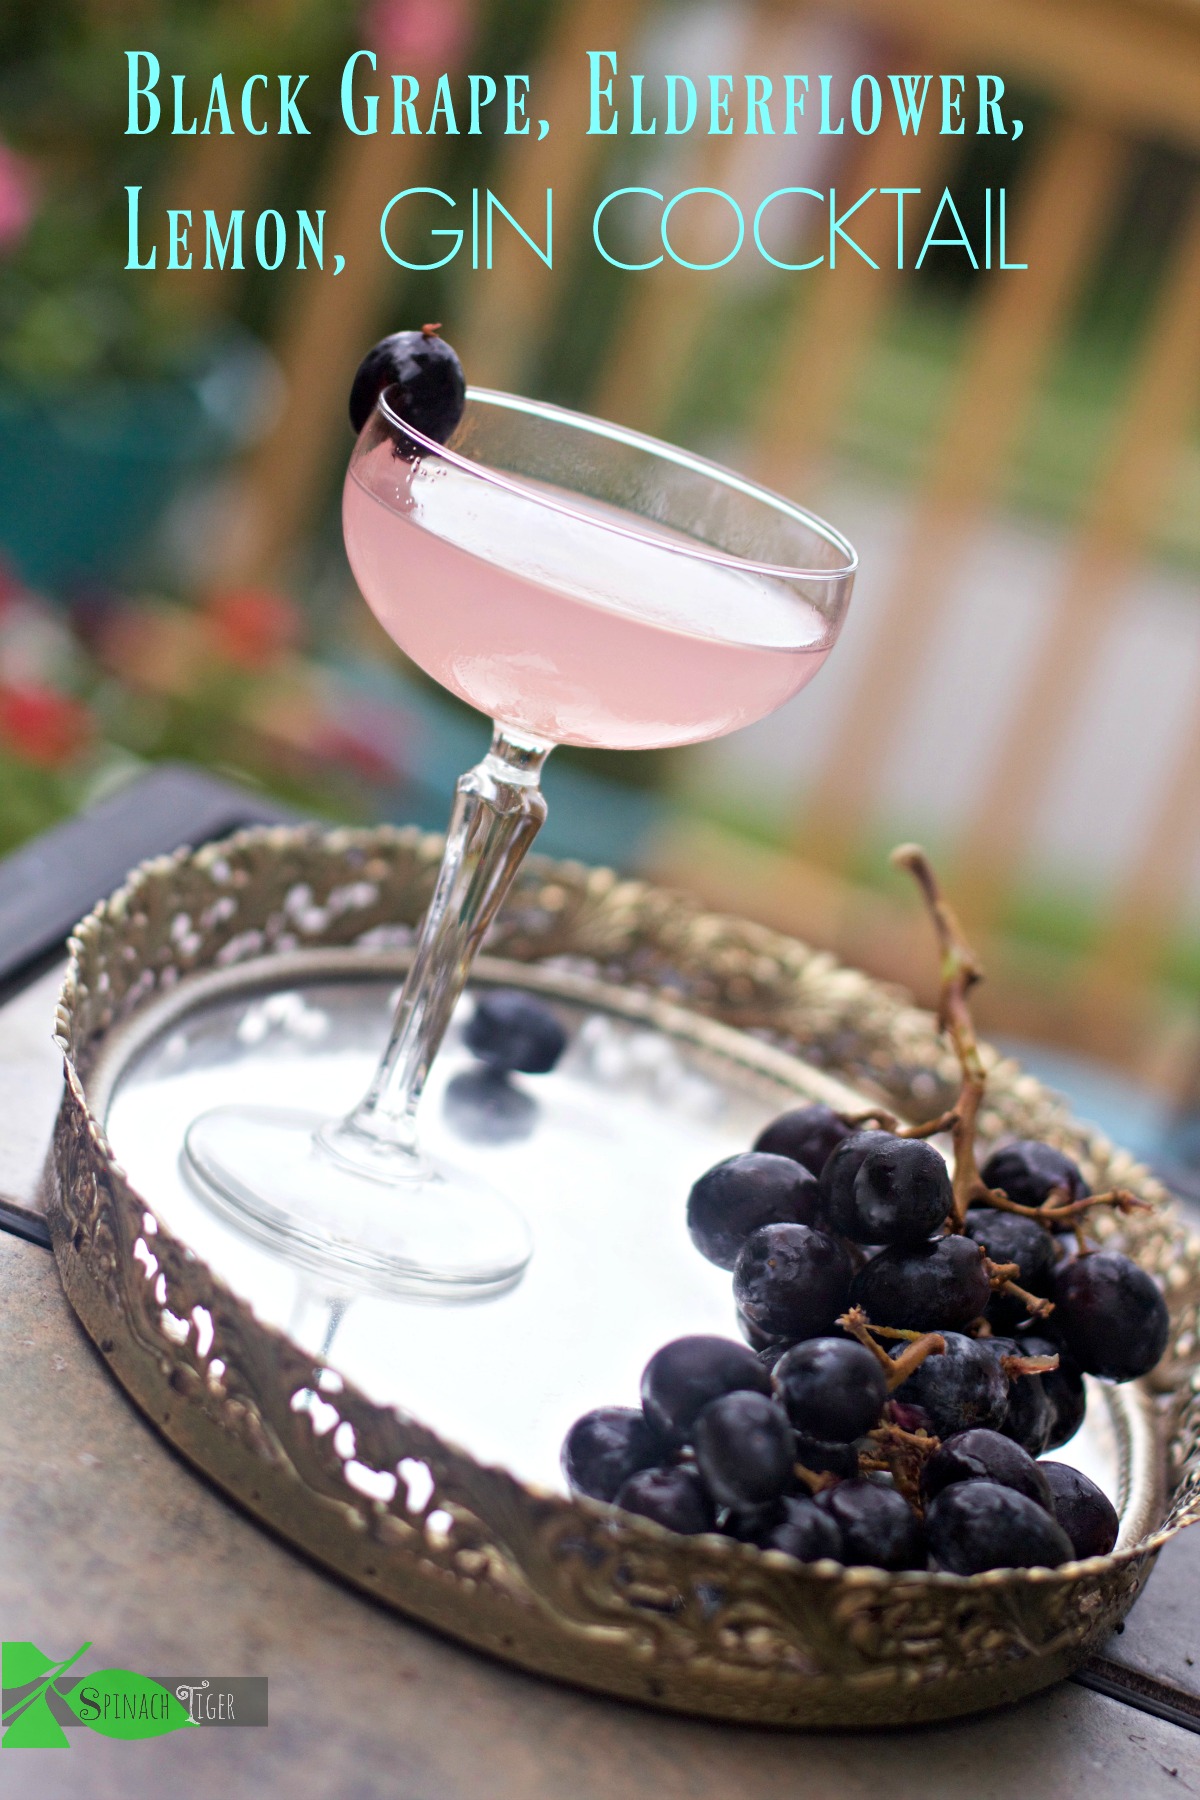 How to Make an elderflower gin cocktail with lemon, black grapes by Spinach Tiger